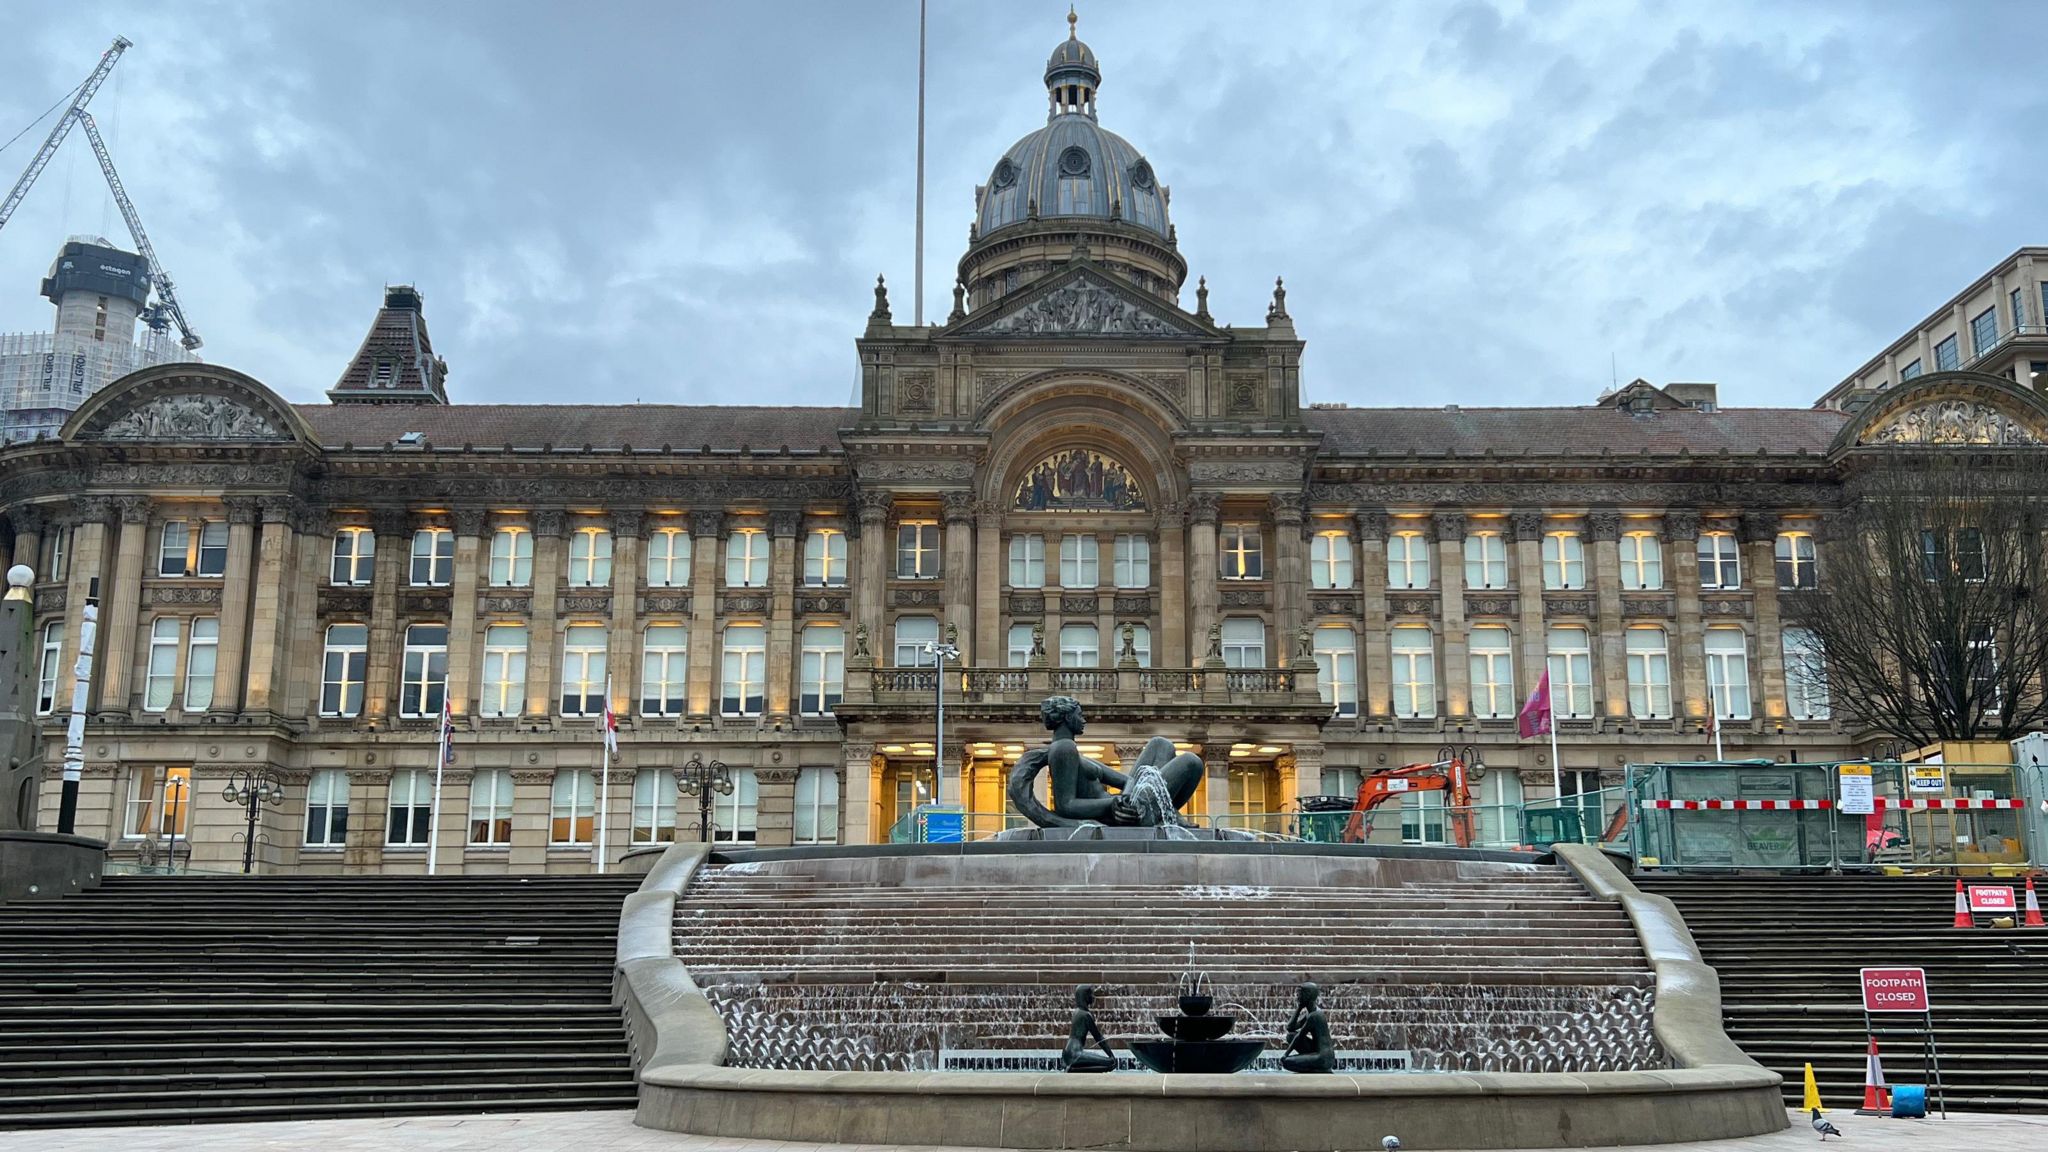 An outside view of Birmingham City Council House in the day with grey clouds above the building and a water fountain in the foreground.